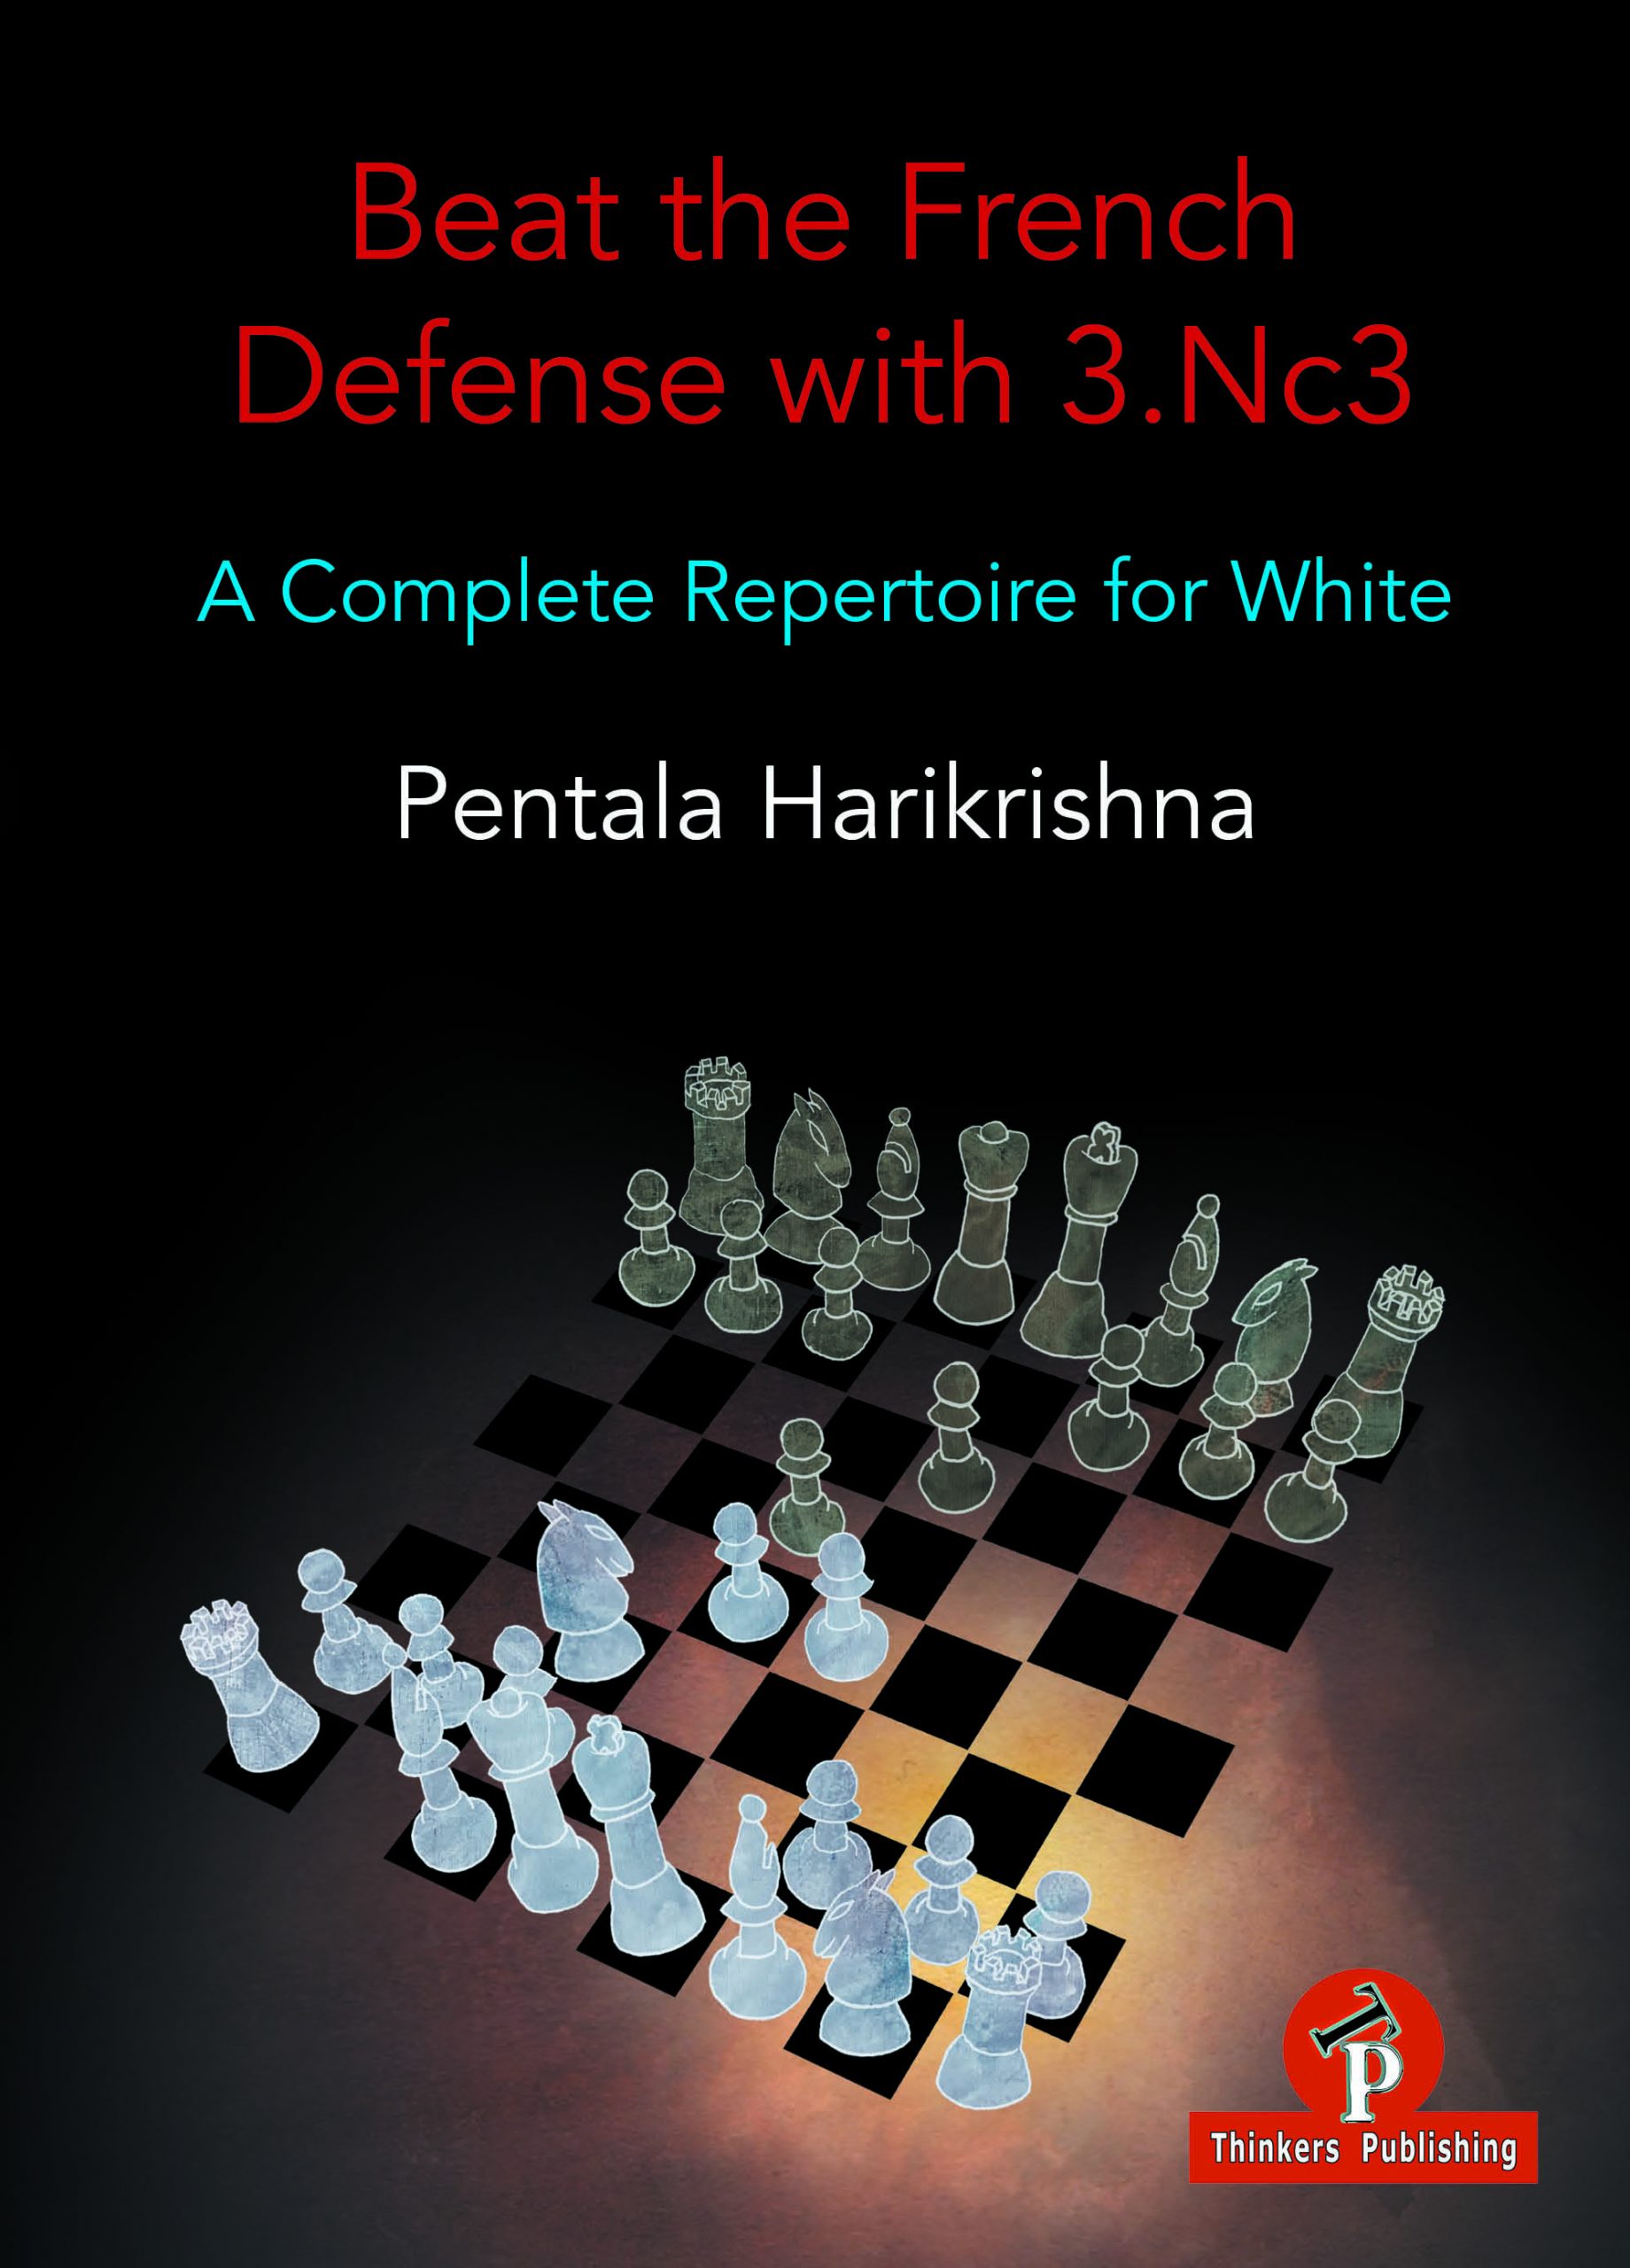 French Defense – Easy Chess Tips